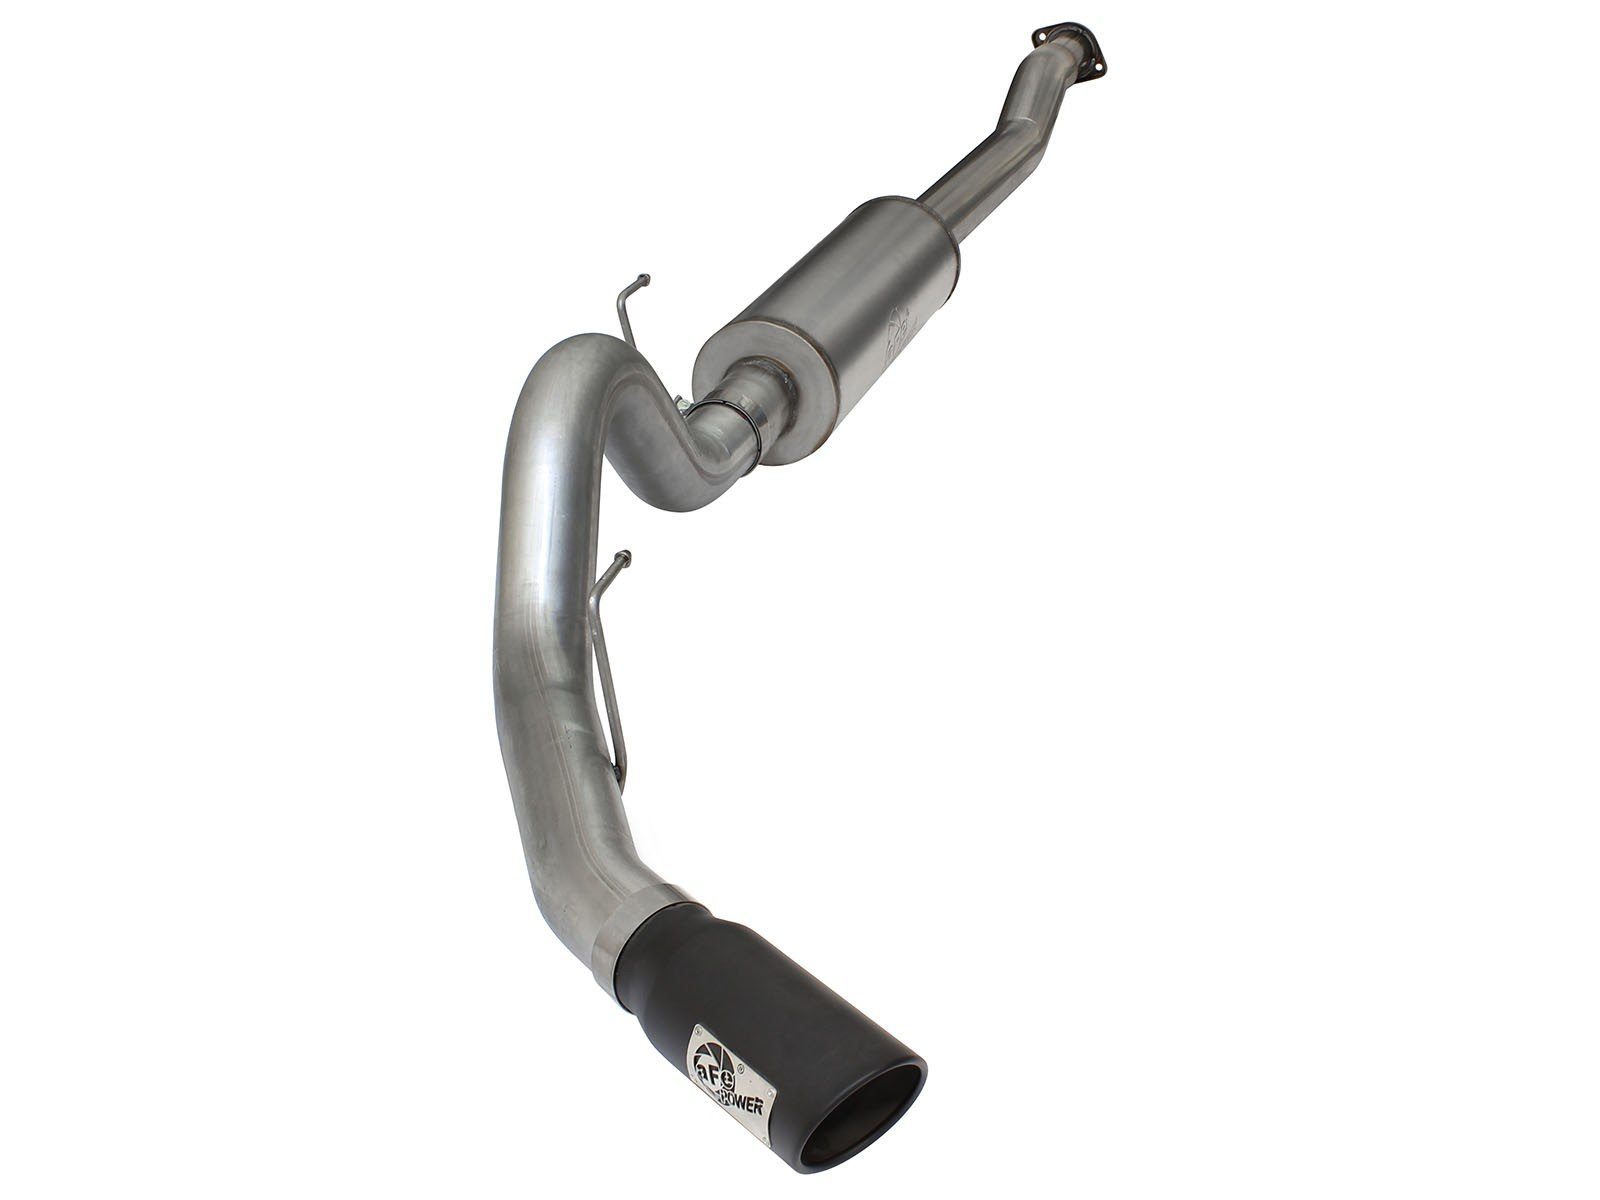 11-14 Ford F150 ATLAS Series 4" 409 Stainless Steel Cat Back Exhaust System AFE Power V6-3.5L EcoBoost w/Black Exhaust Tip display